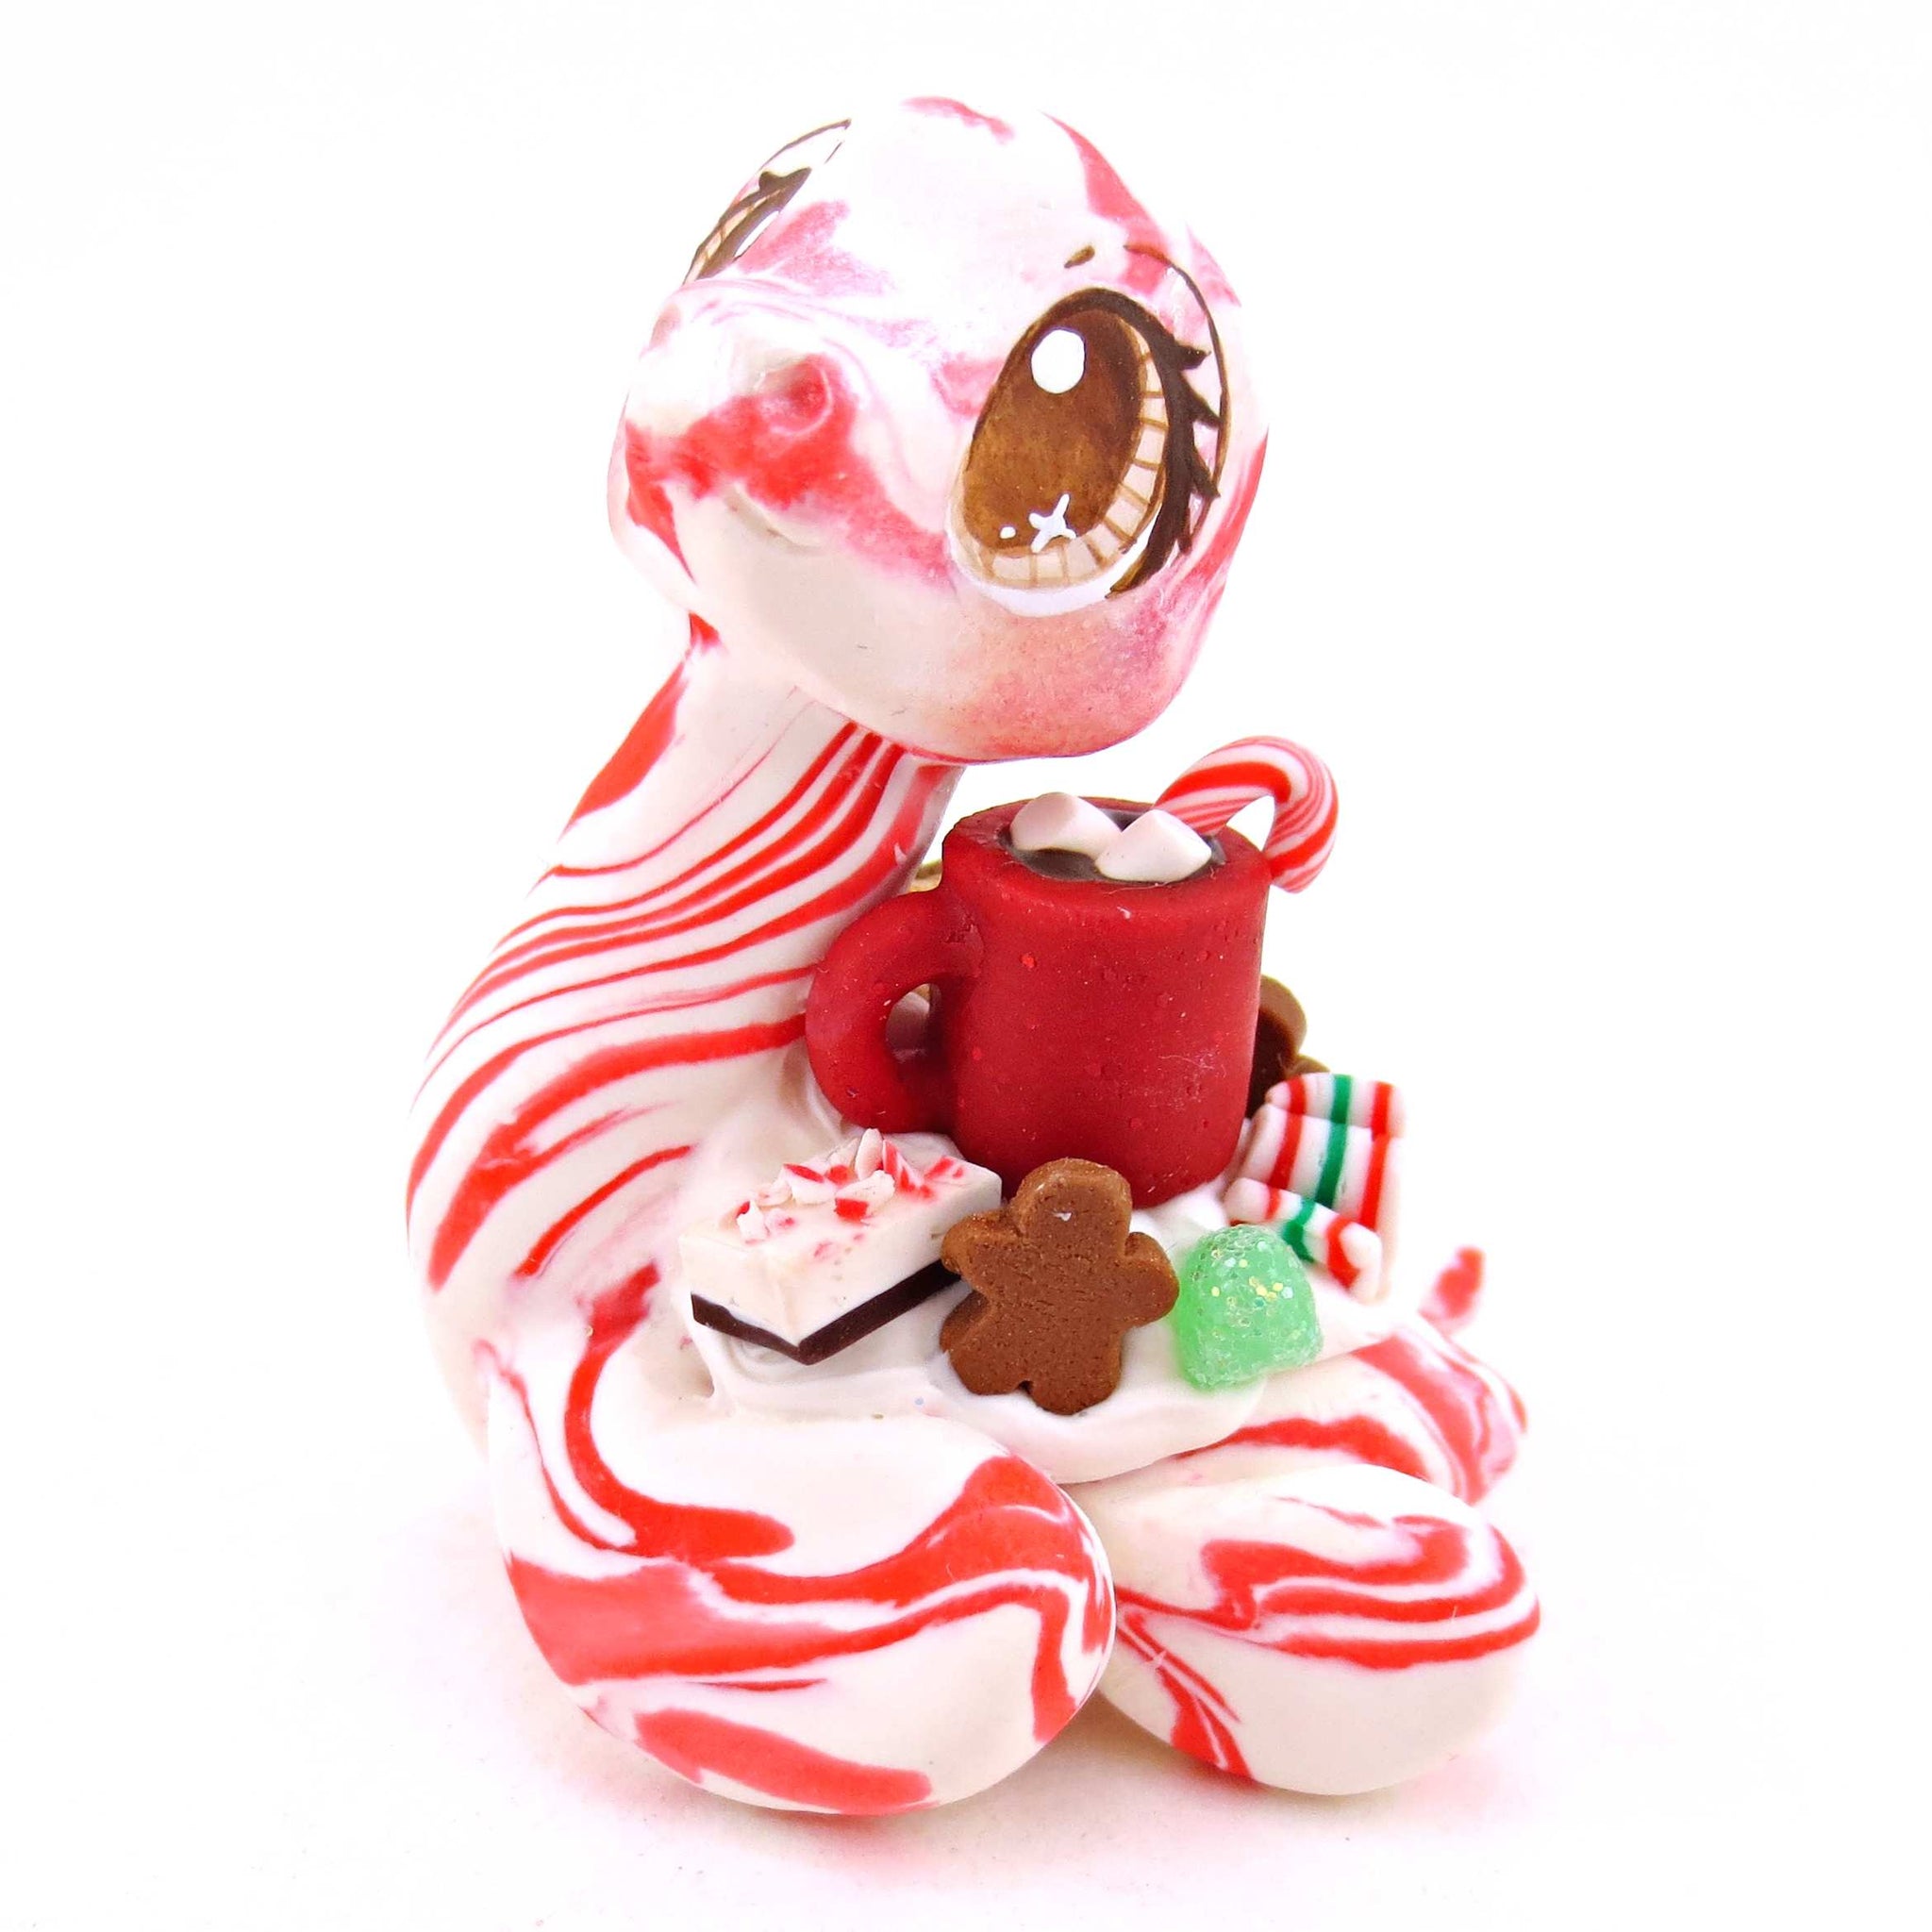 Candy Cane Christmas Dessert Nessie - Polymer Clay Animals Christmas Collection